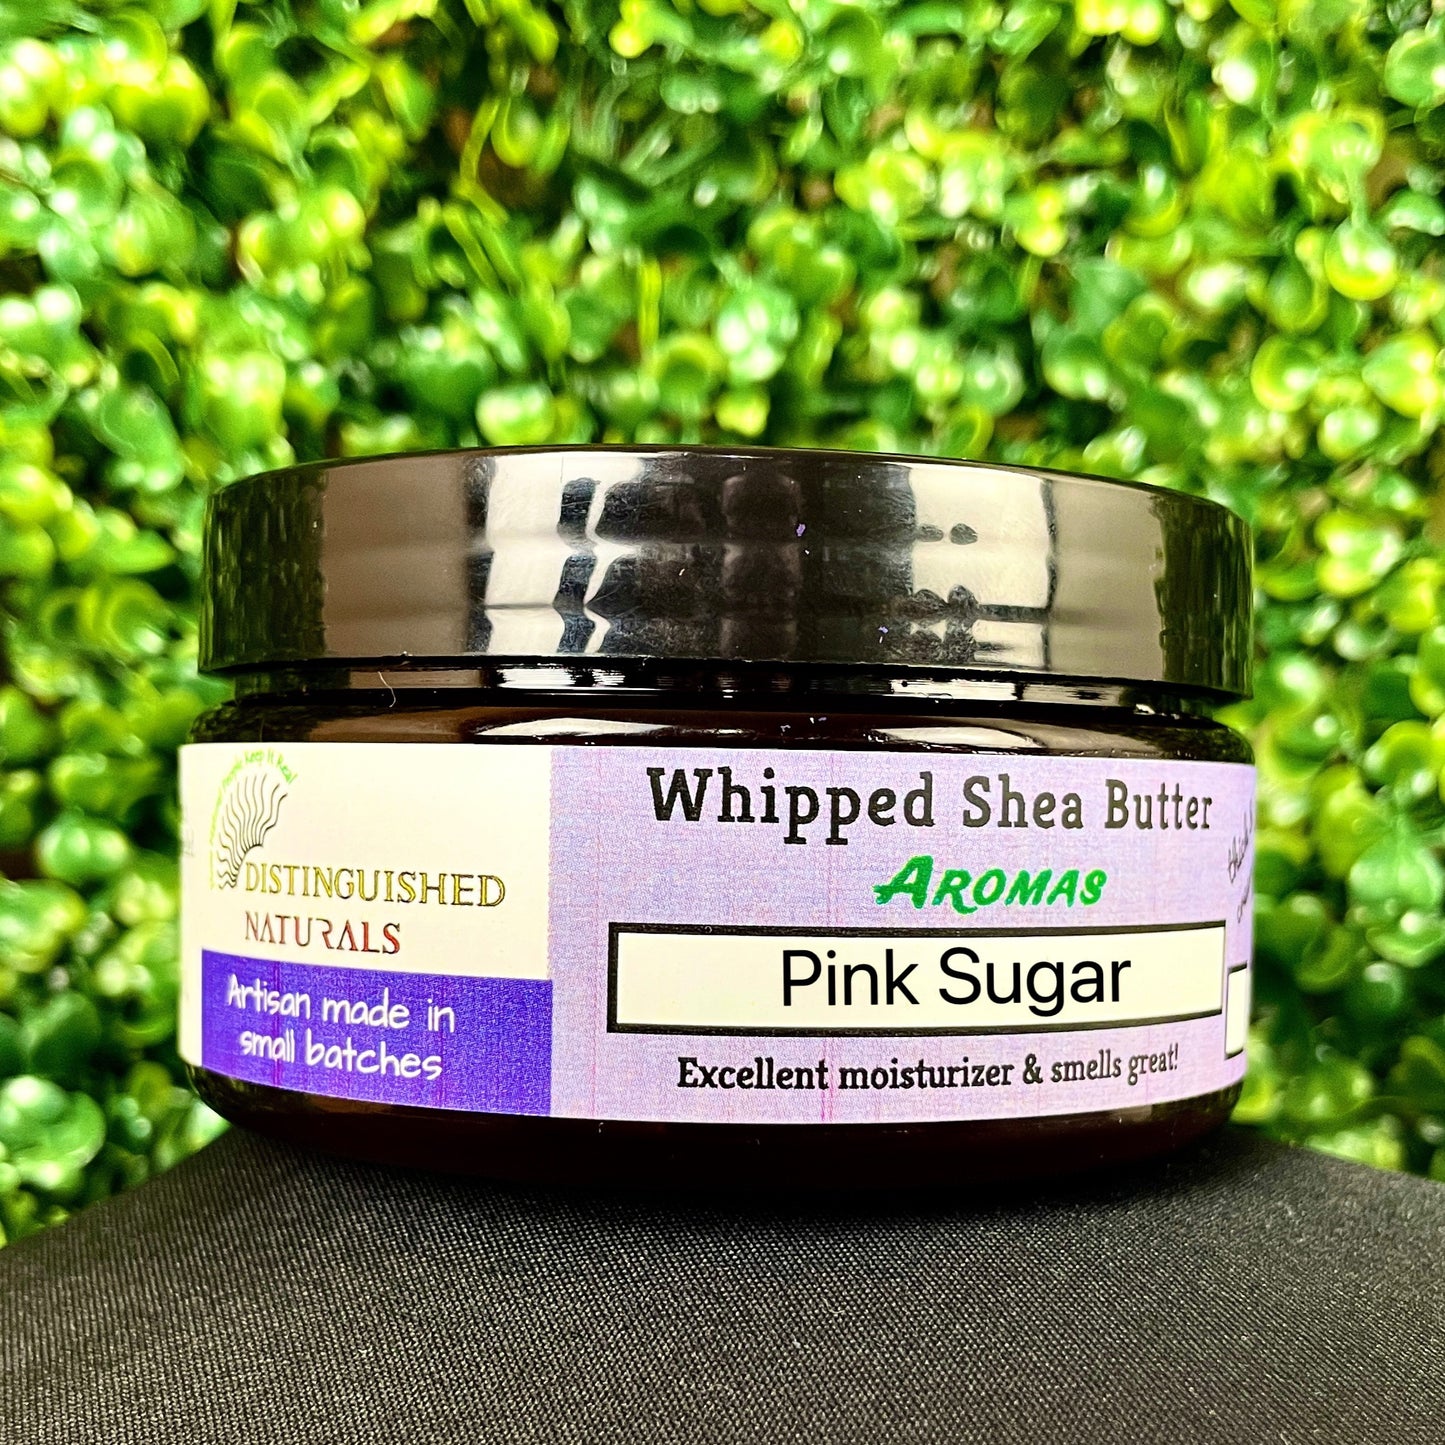 Whipped Shea Butter - Aromas (Scented)